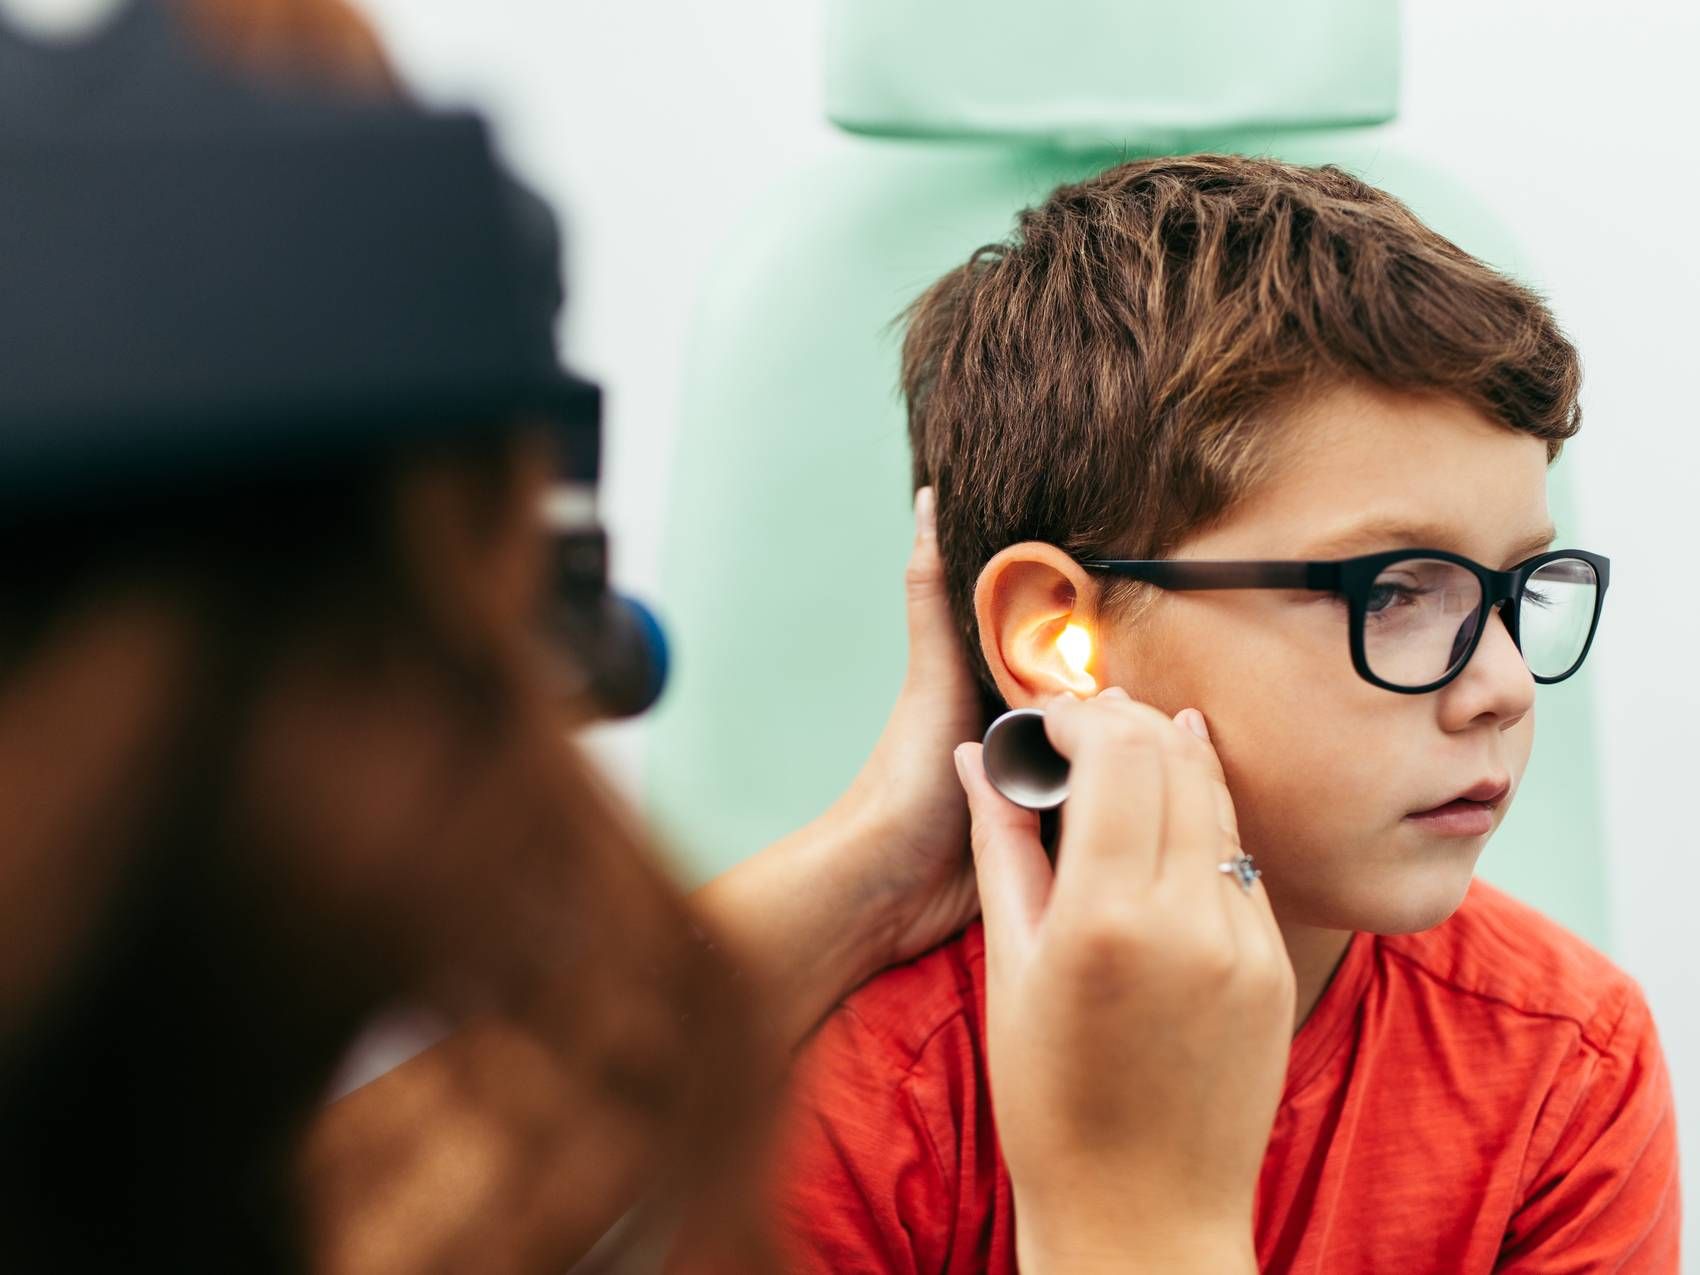 Even a moderate loss of hearing can impact social development in children, experts say.